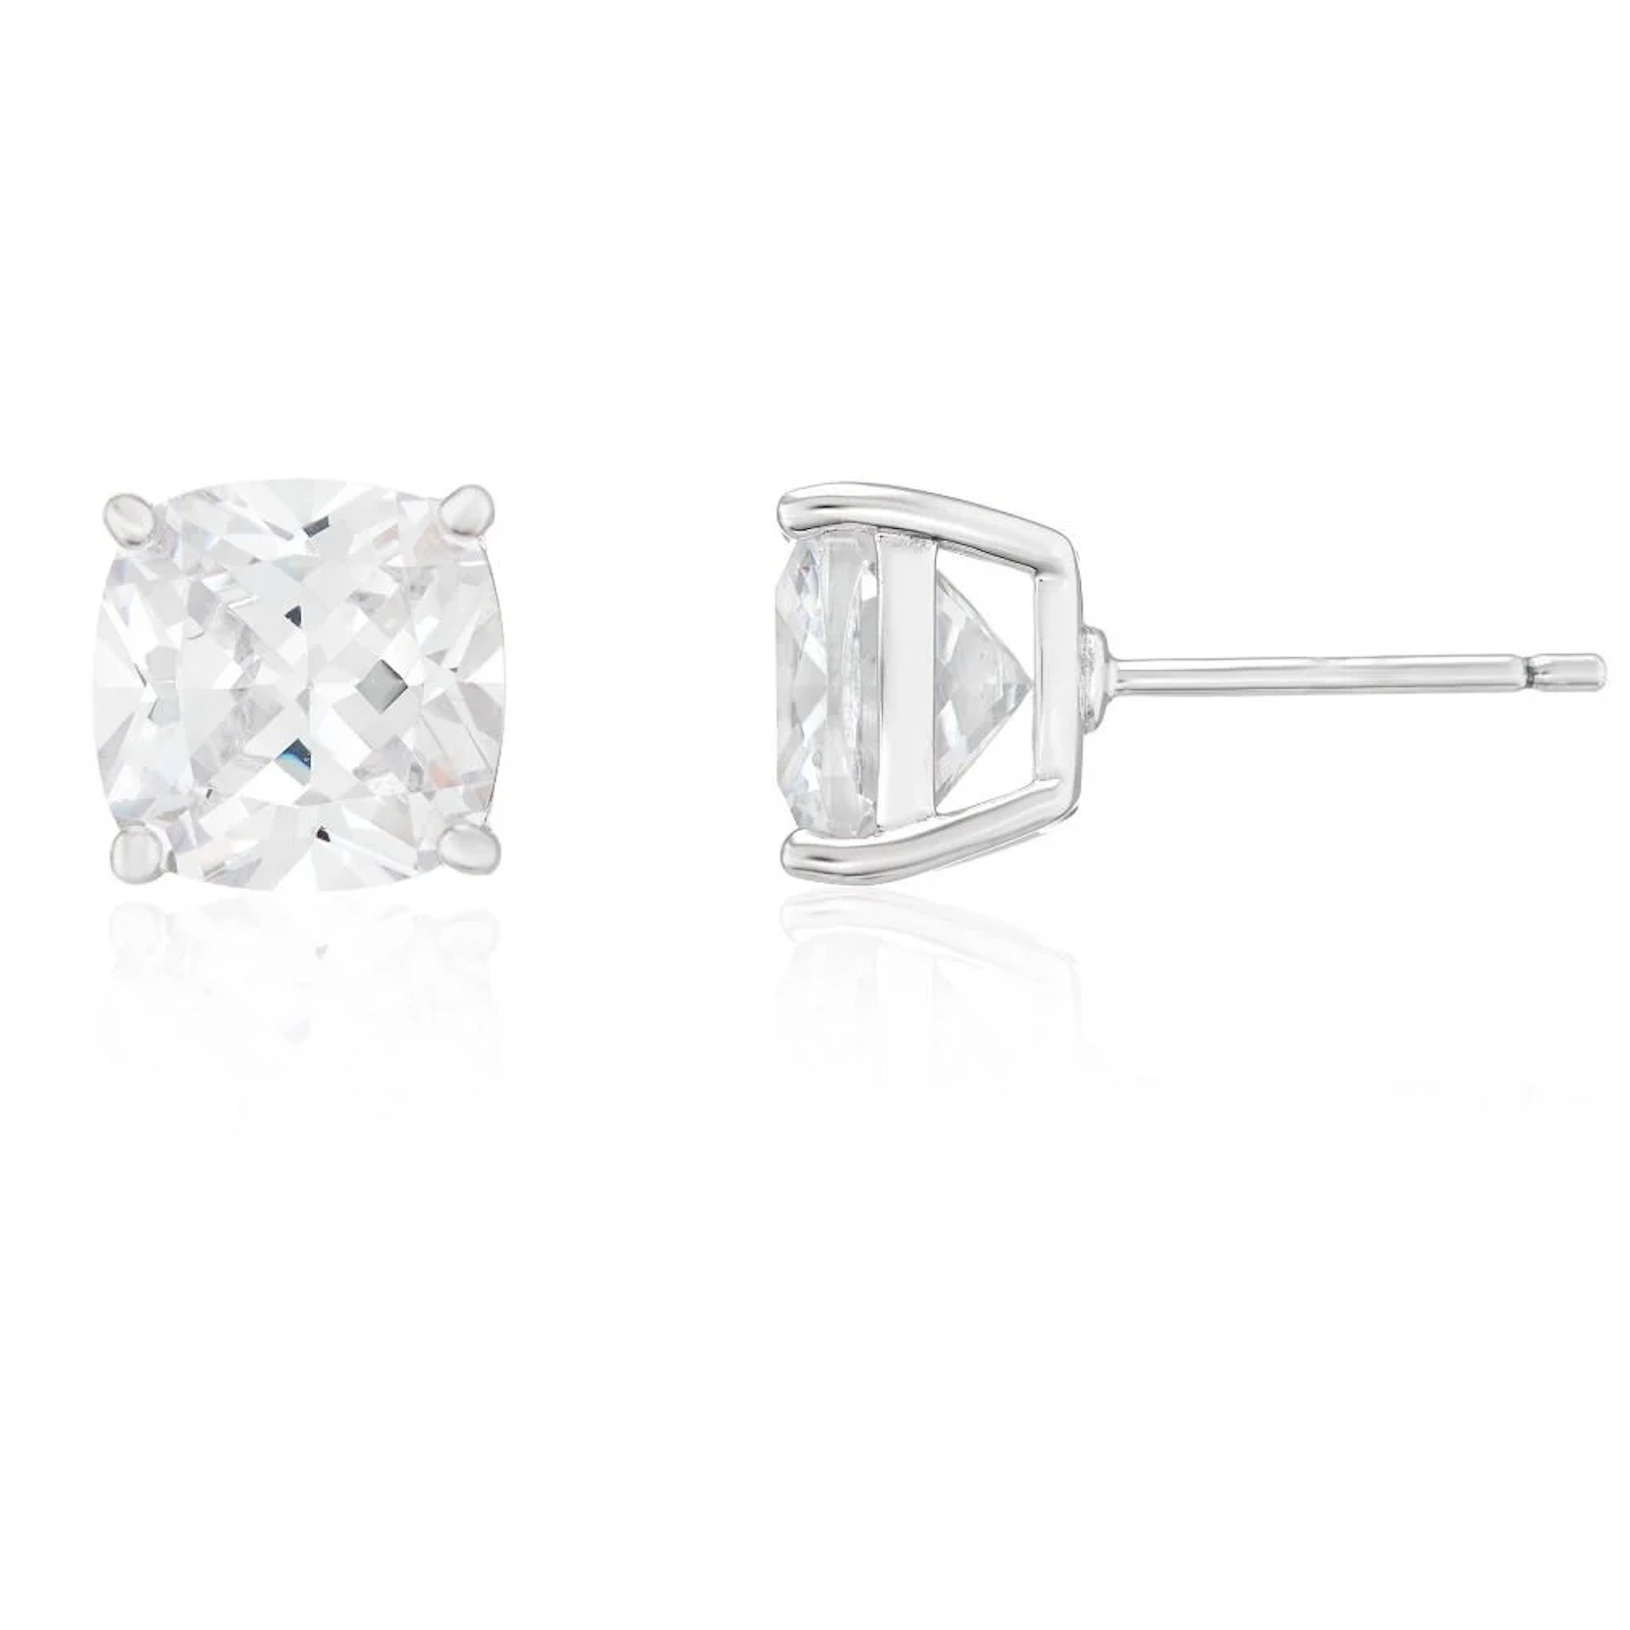 BUCKLEY LONDON The Flawless Collection - Cushion Solitaire Earrings